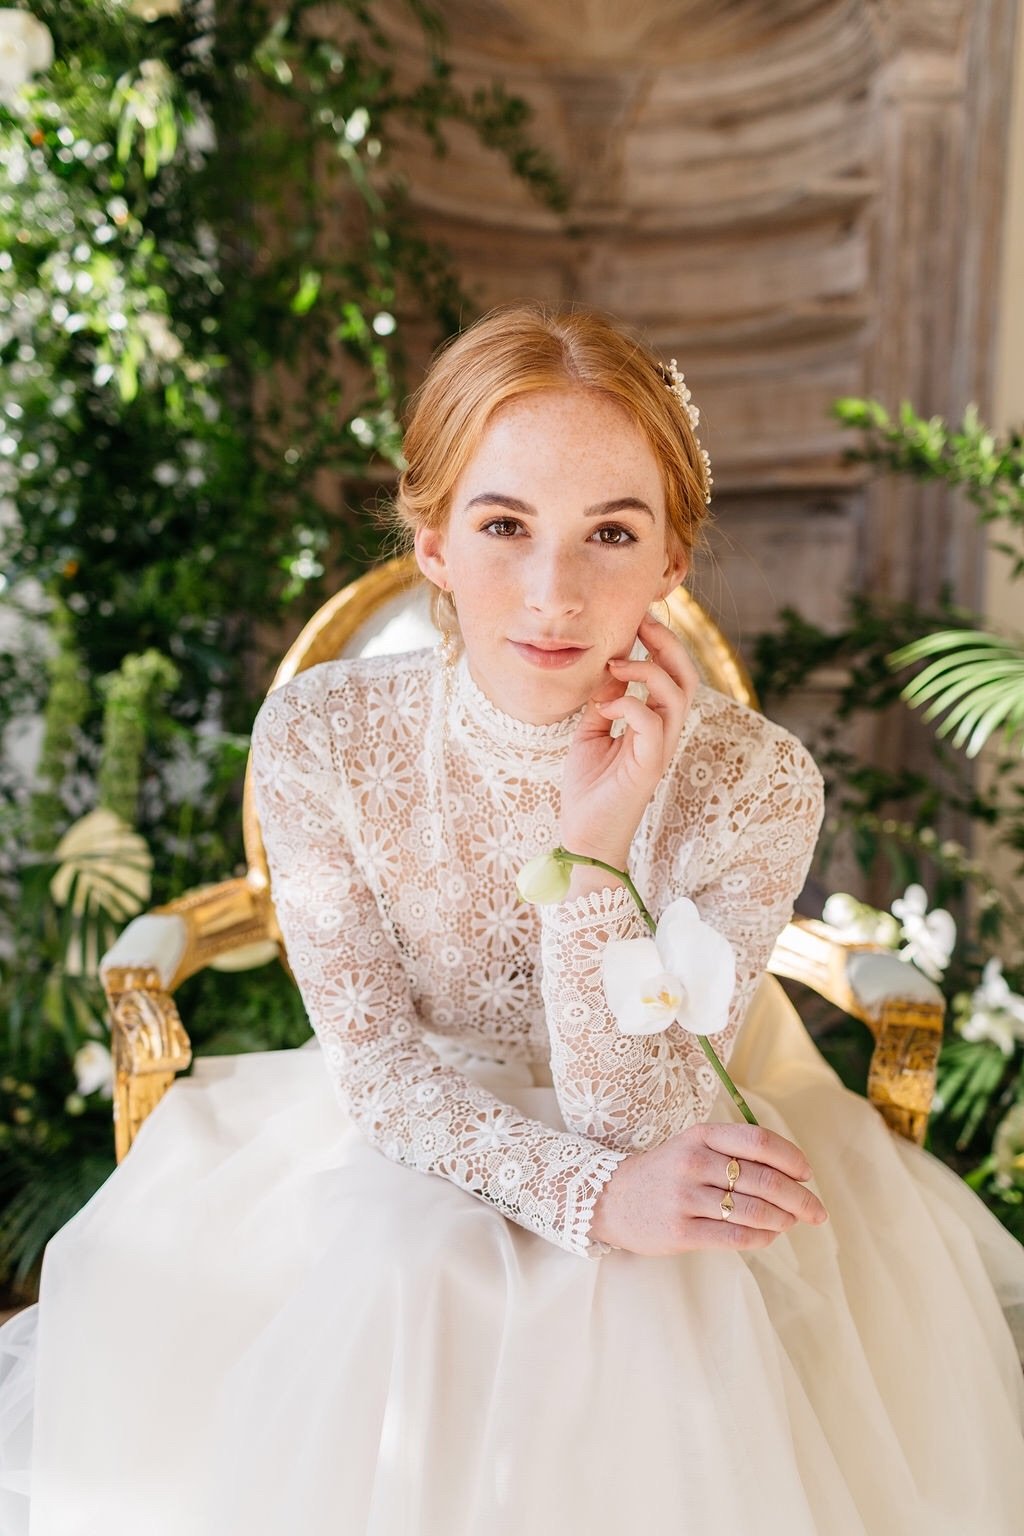 A red haired model wearing a lace wedding dress holding an orchid flower